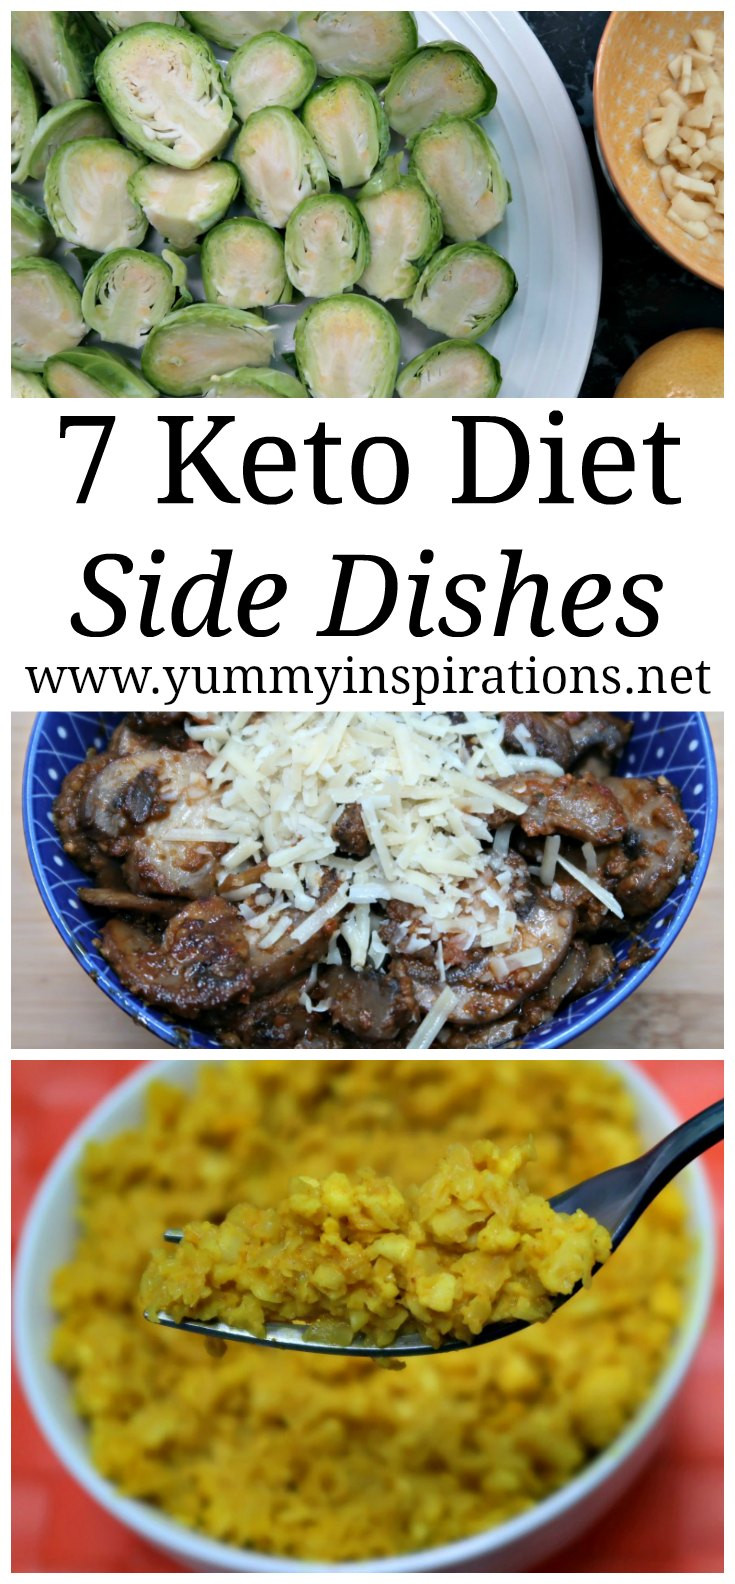 Low Carb Thanksgiving Side Dishes
 7 Keto Side Dishes Easy Low Carb Sides LCHF Recipes